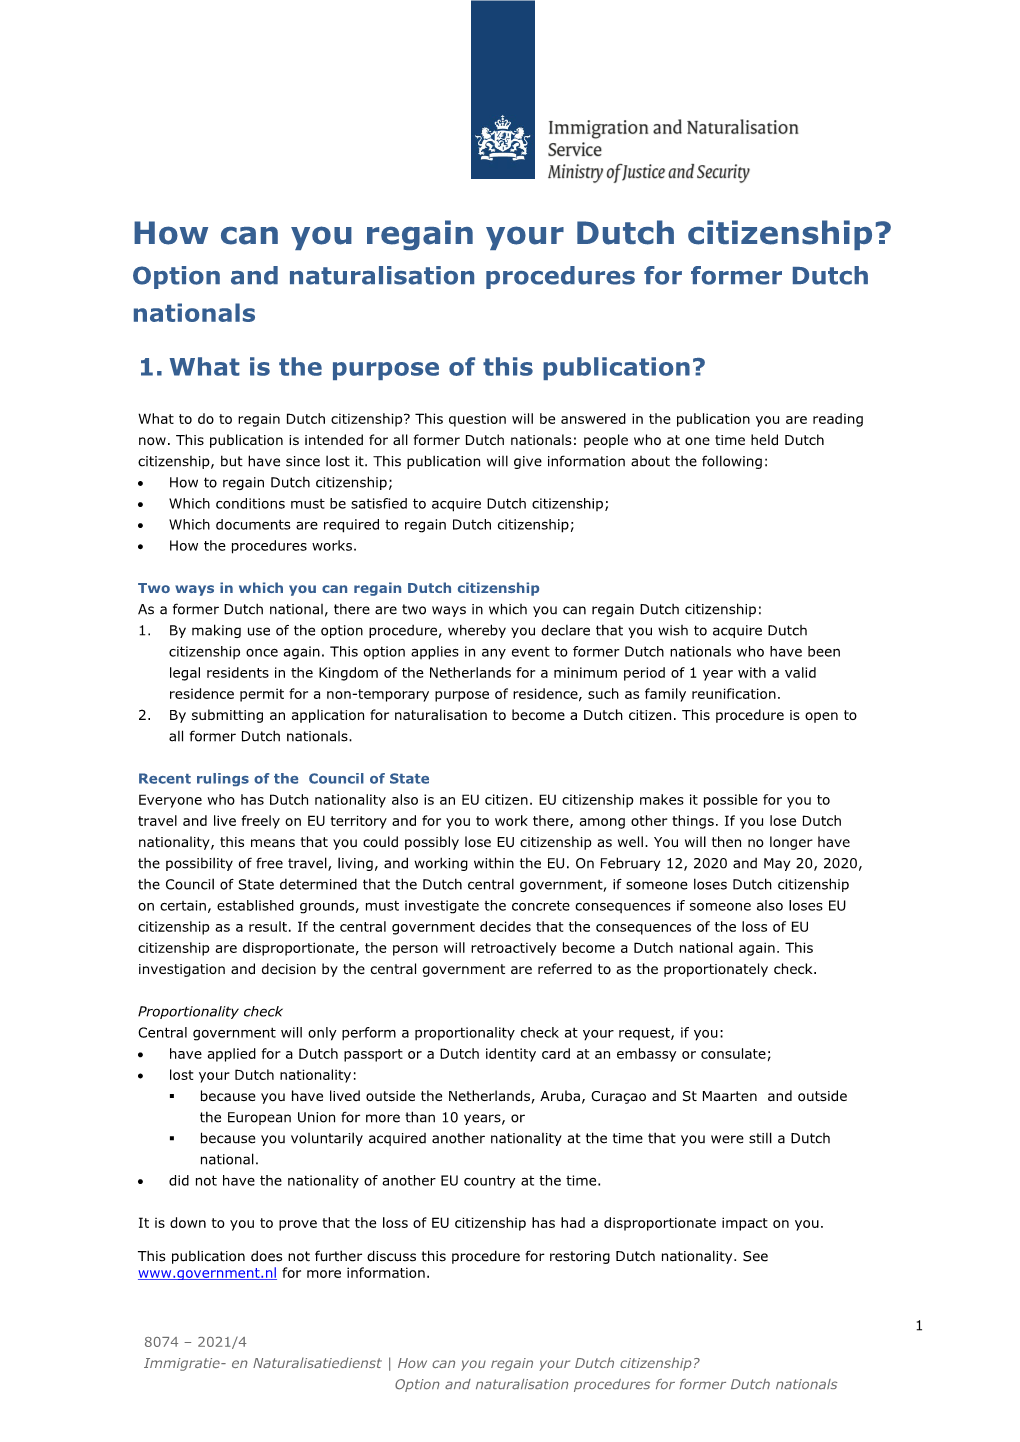 How Can You Regain Your Dutch Citizenship? Option and Naturalisation Procedures for Former Dutch Nationals